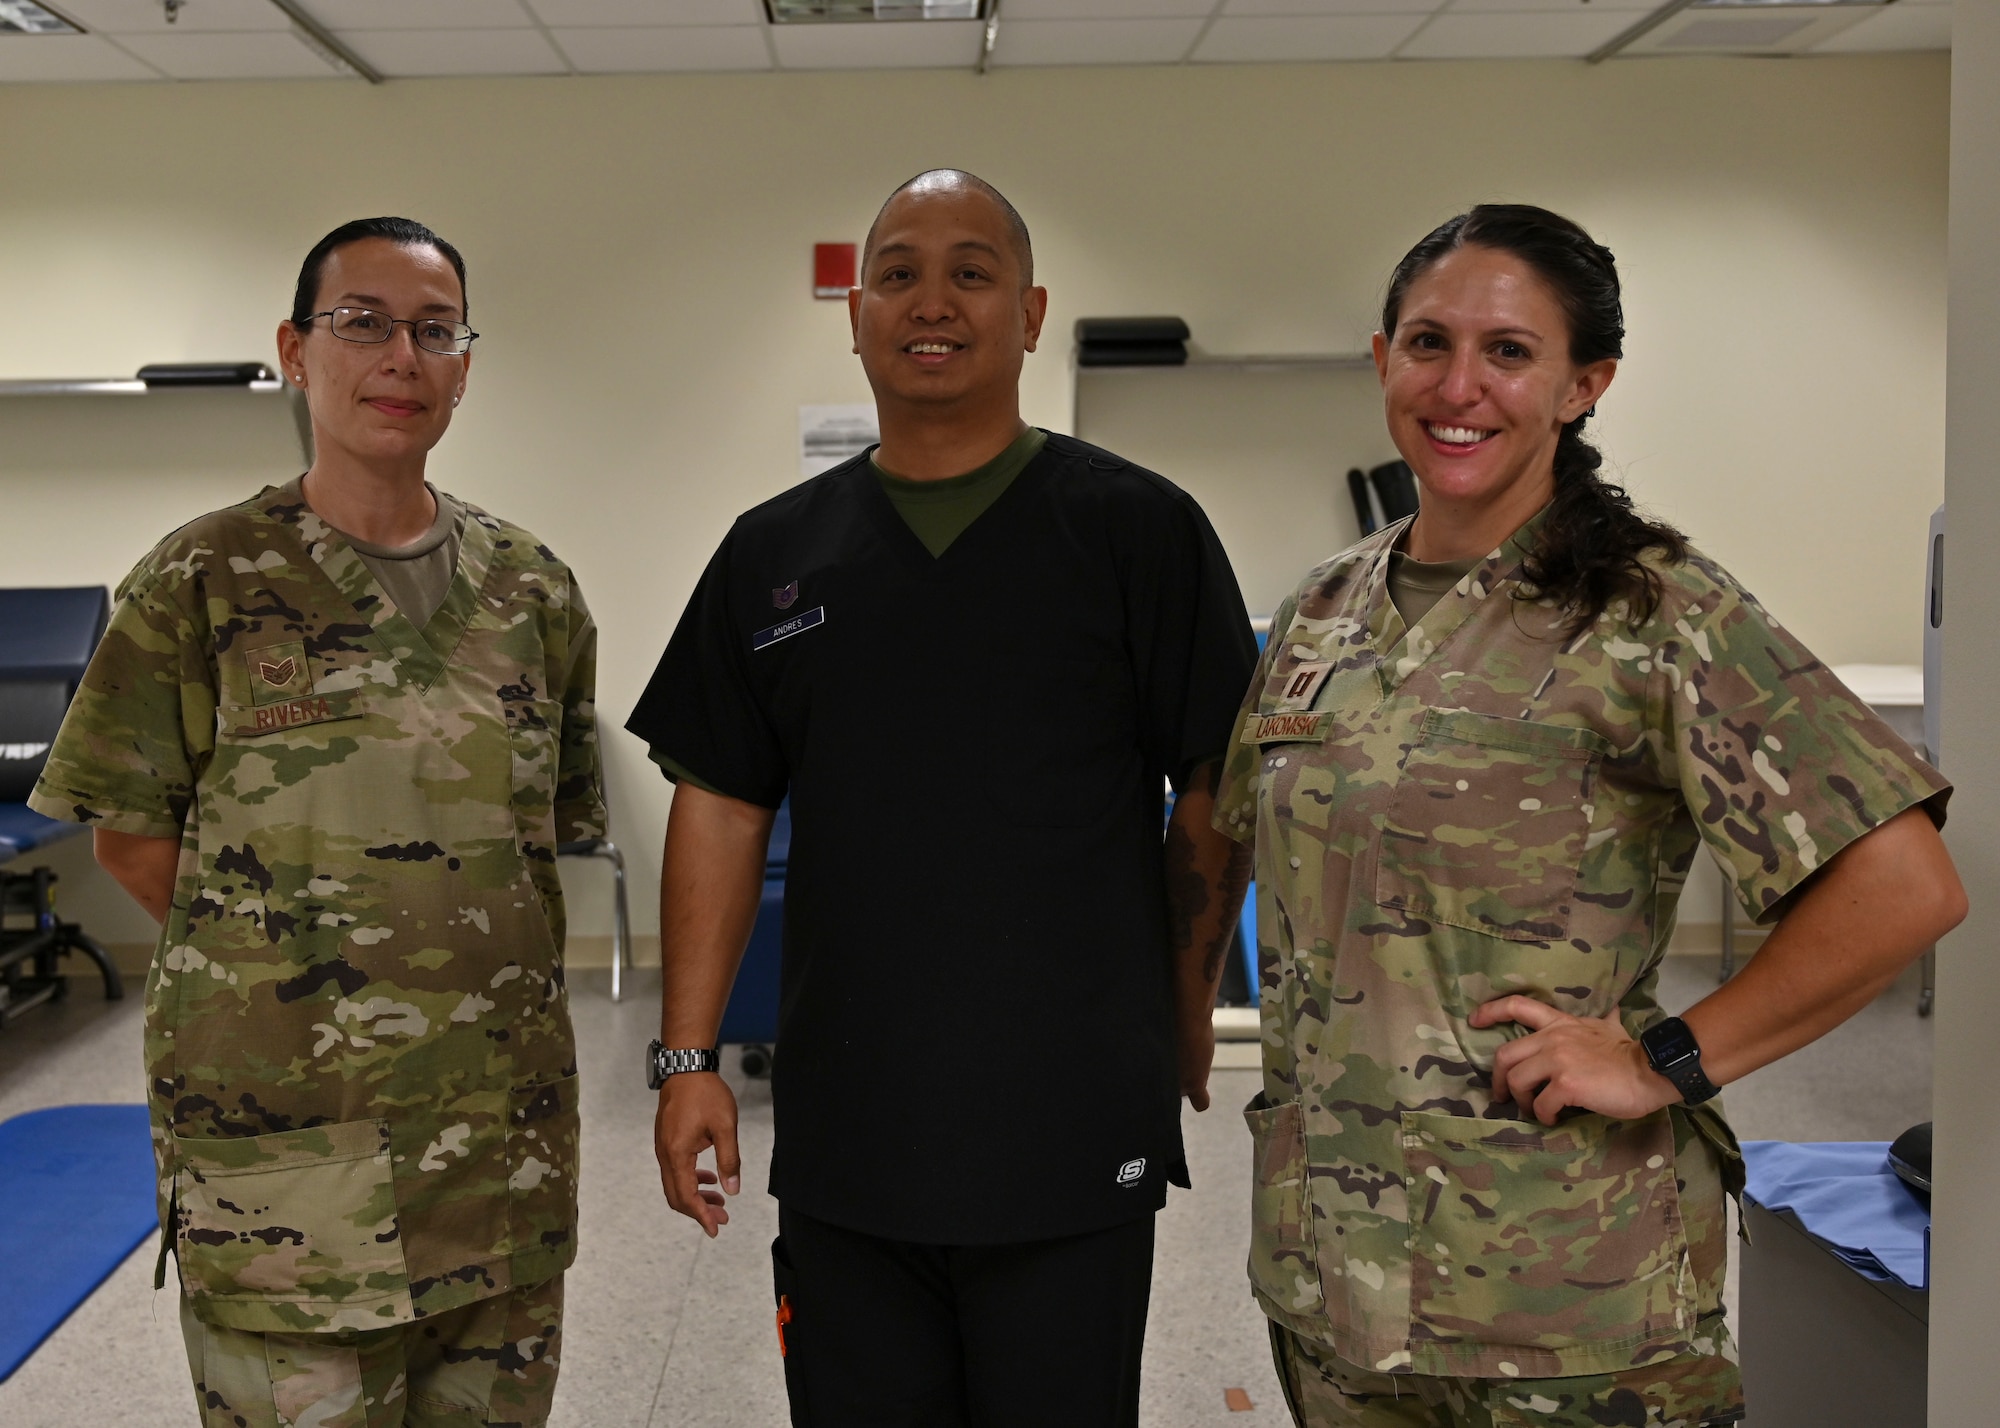 U.S. Air Force Staff Sgt. Monica Rivera, 36th Medical Group Physical Therapy Clinic noncommissioned officer in charge, Tech. Sgt. Joel Andres, 36 MDG PT Clinic human performance flight chief and Capt. Meredith LaKomski, 36 MDG PT Clinic element chief, pose for a group photo on Andersen Air Force Base, Guam, Sept. 7, 2022. The PT Clinic is responsible for treating acute or chronic musculoskeletal pain, impact injuries, joint and muscle pain, post-operative conditions and sports injuries. (U.S. Air Force photo by Airman 1st Class Lauren Clevenger)